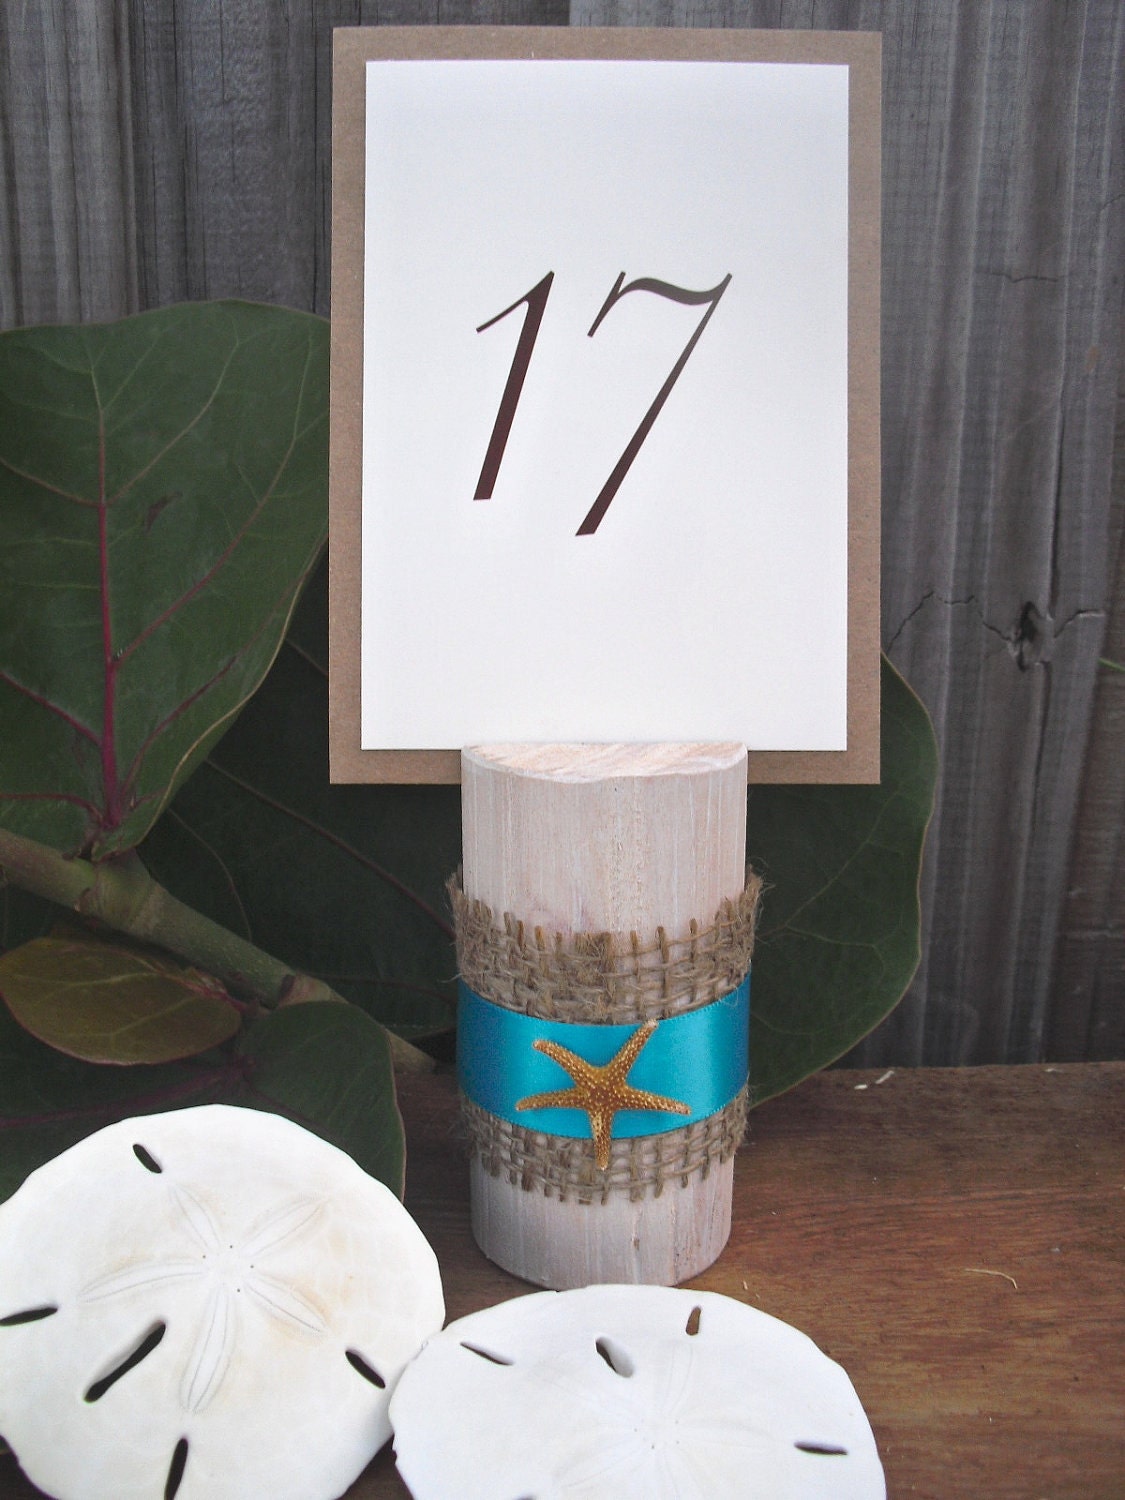 SET OF 6 Whitewashed Nautical Wood Table Number Holders with Starfish Item